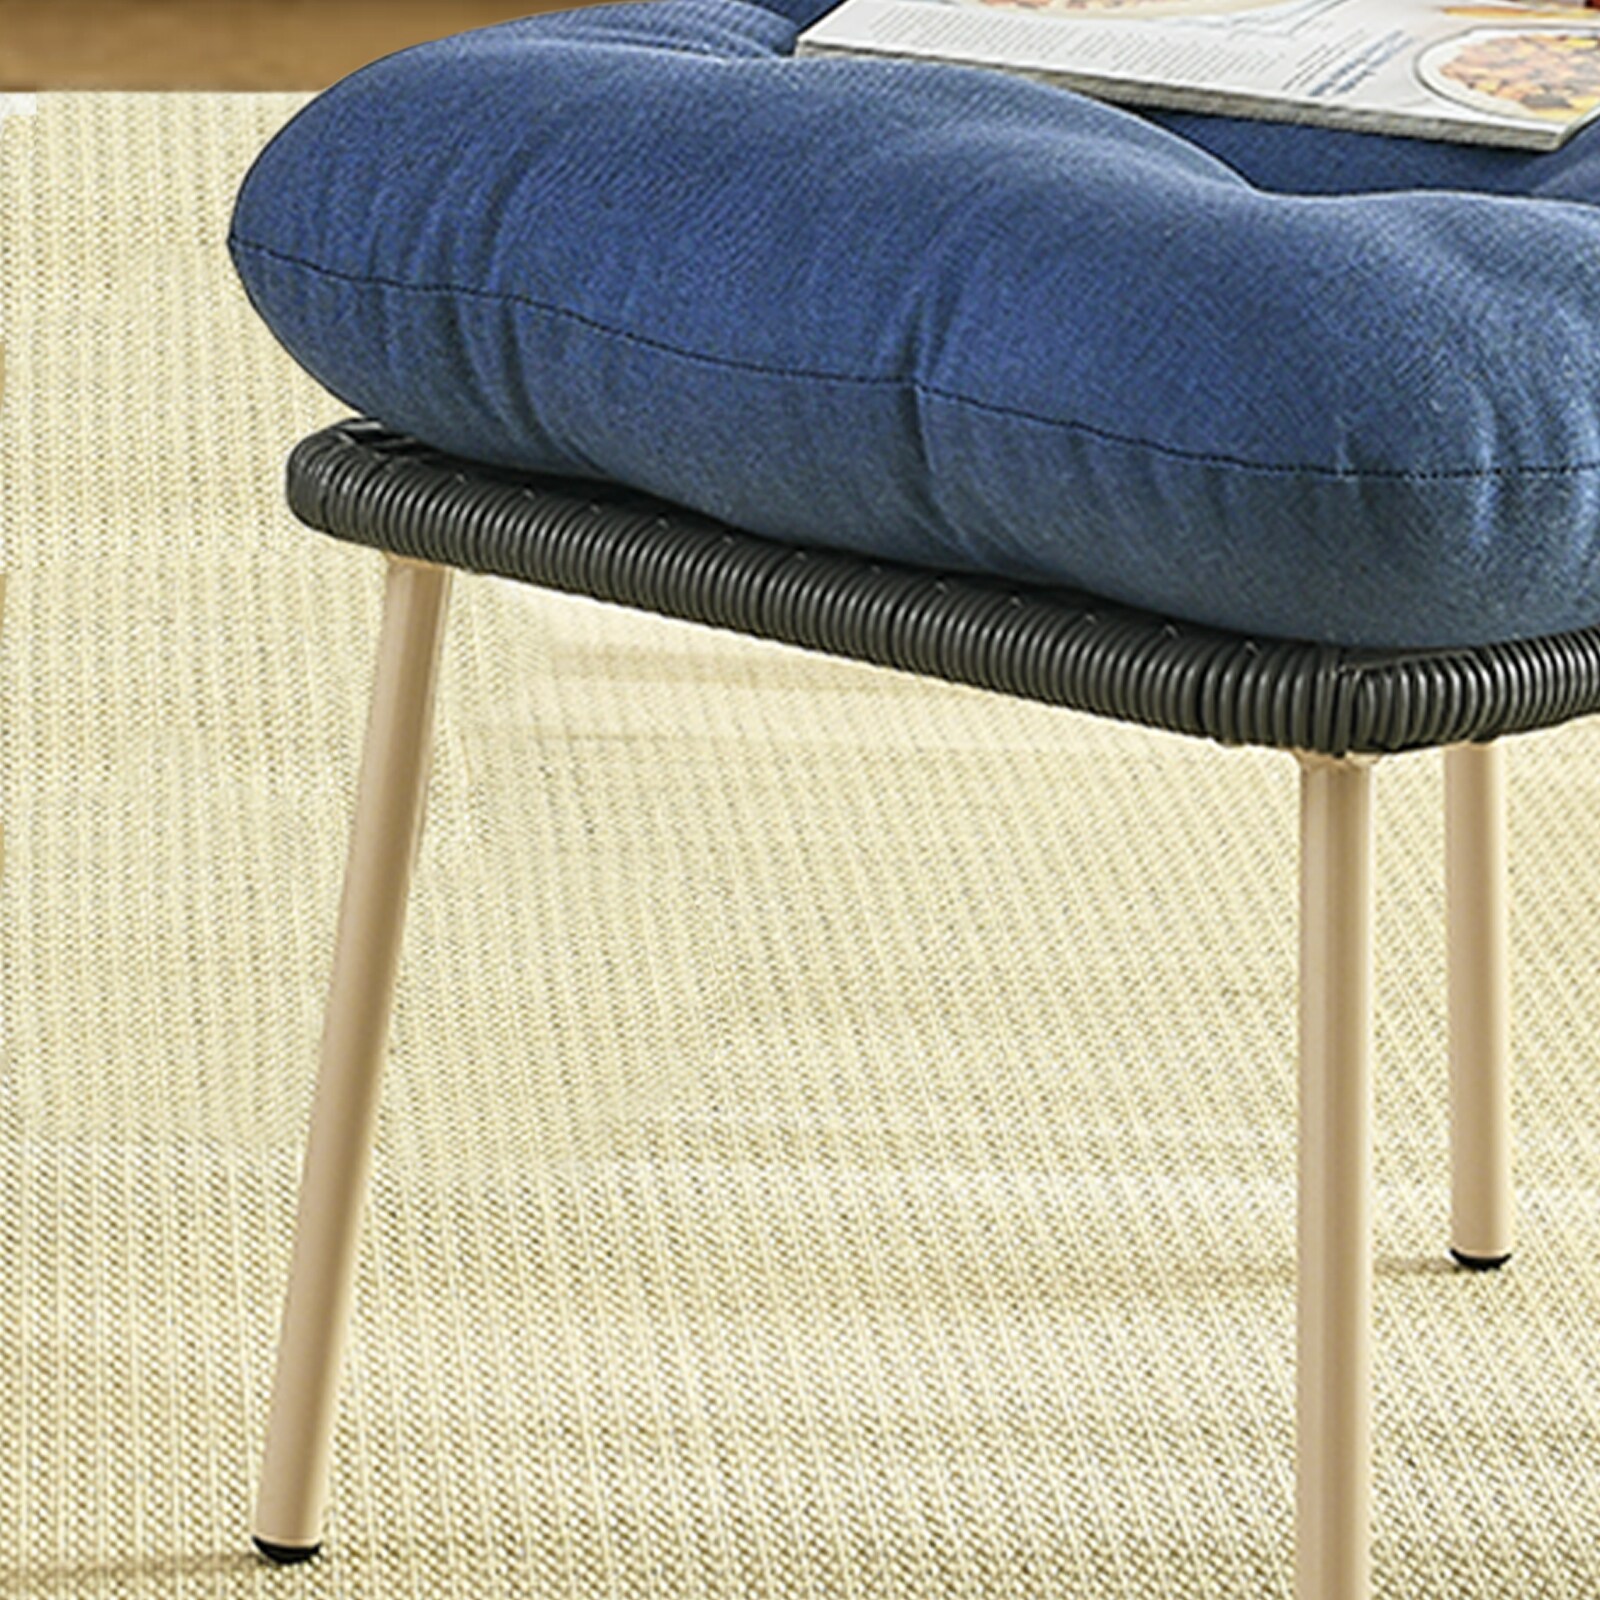 Redwood Foot Stool, Stable Stool with Flared-Leg Design